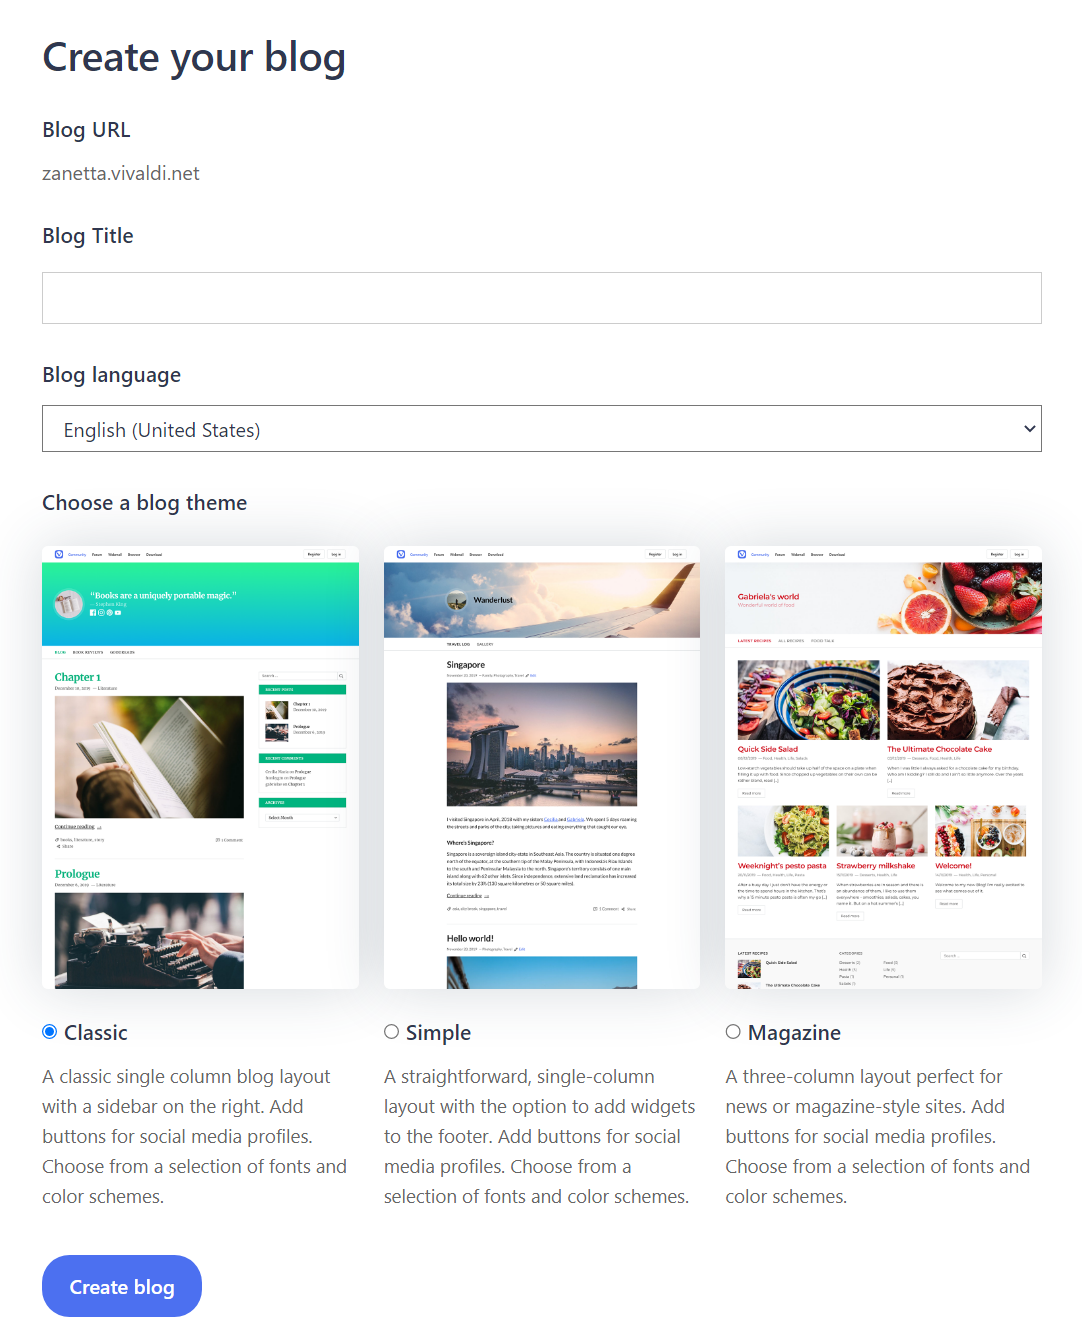 Create a blog page